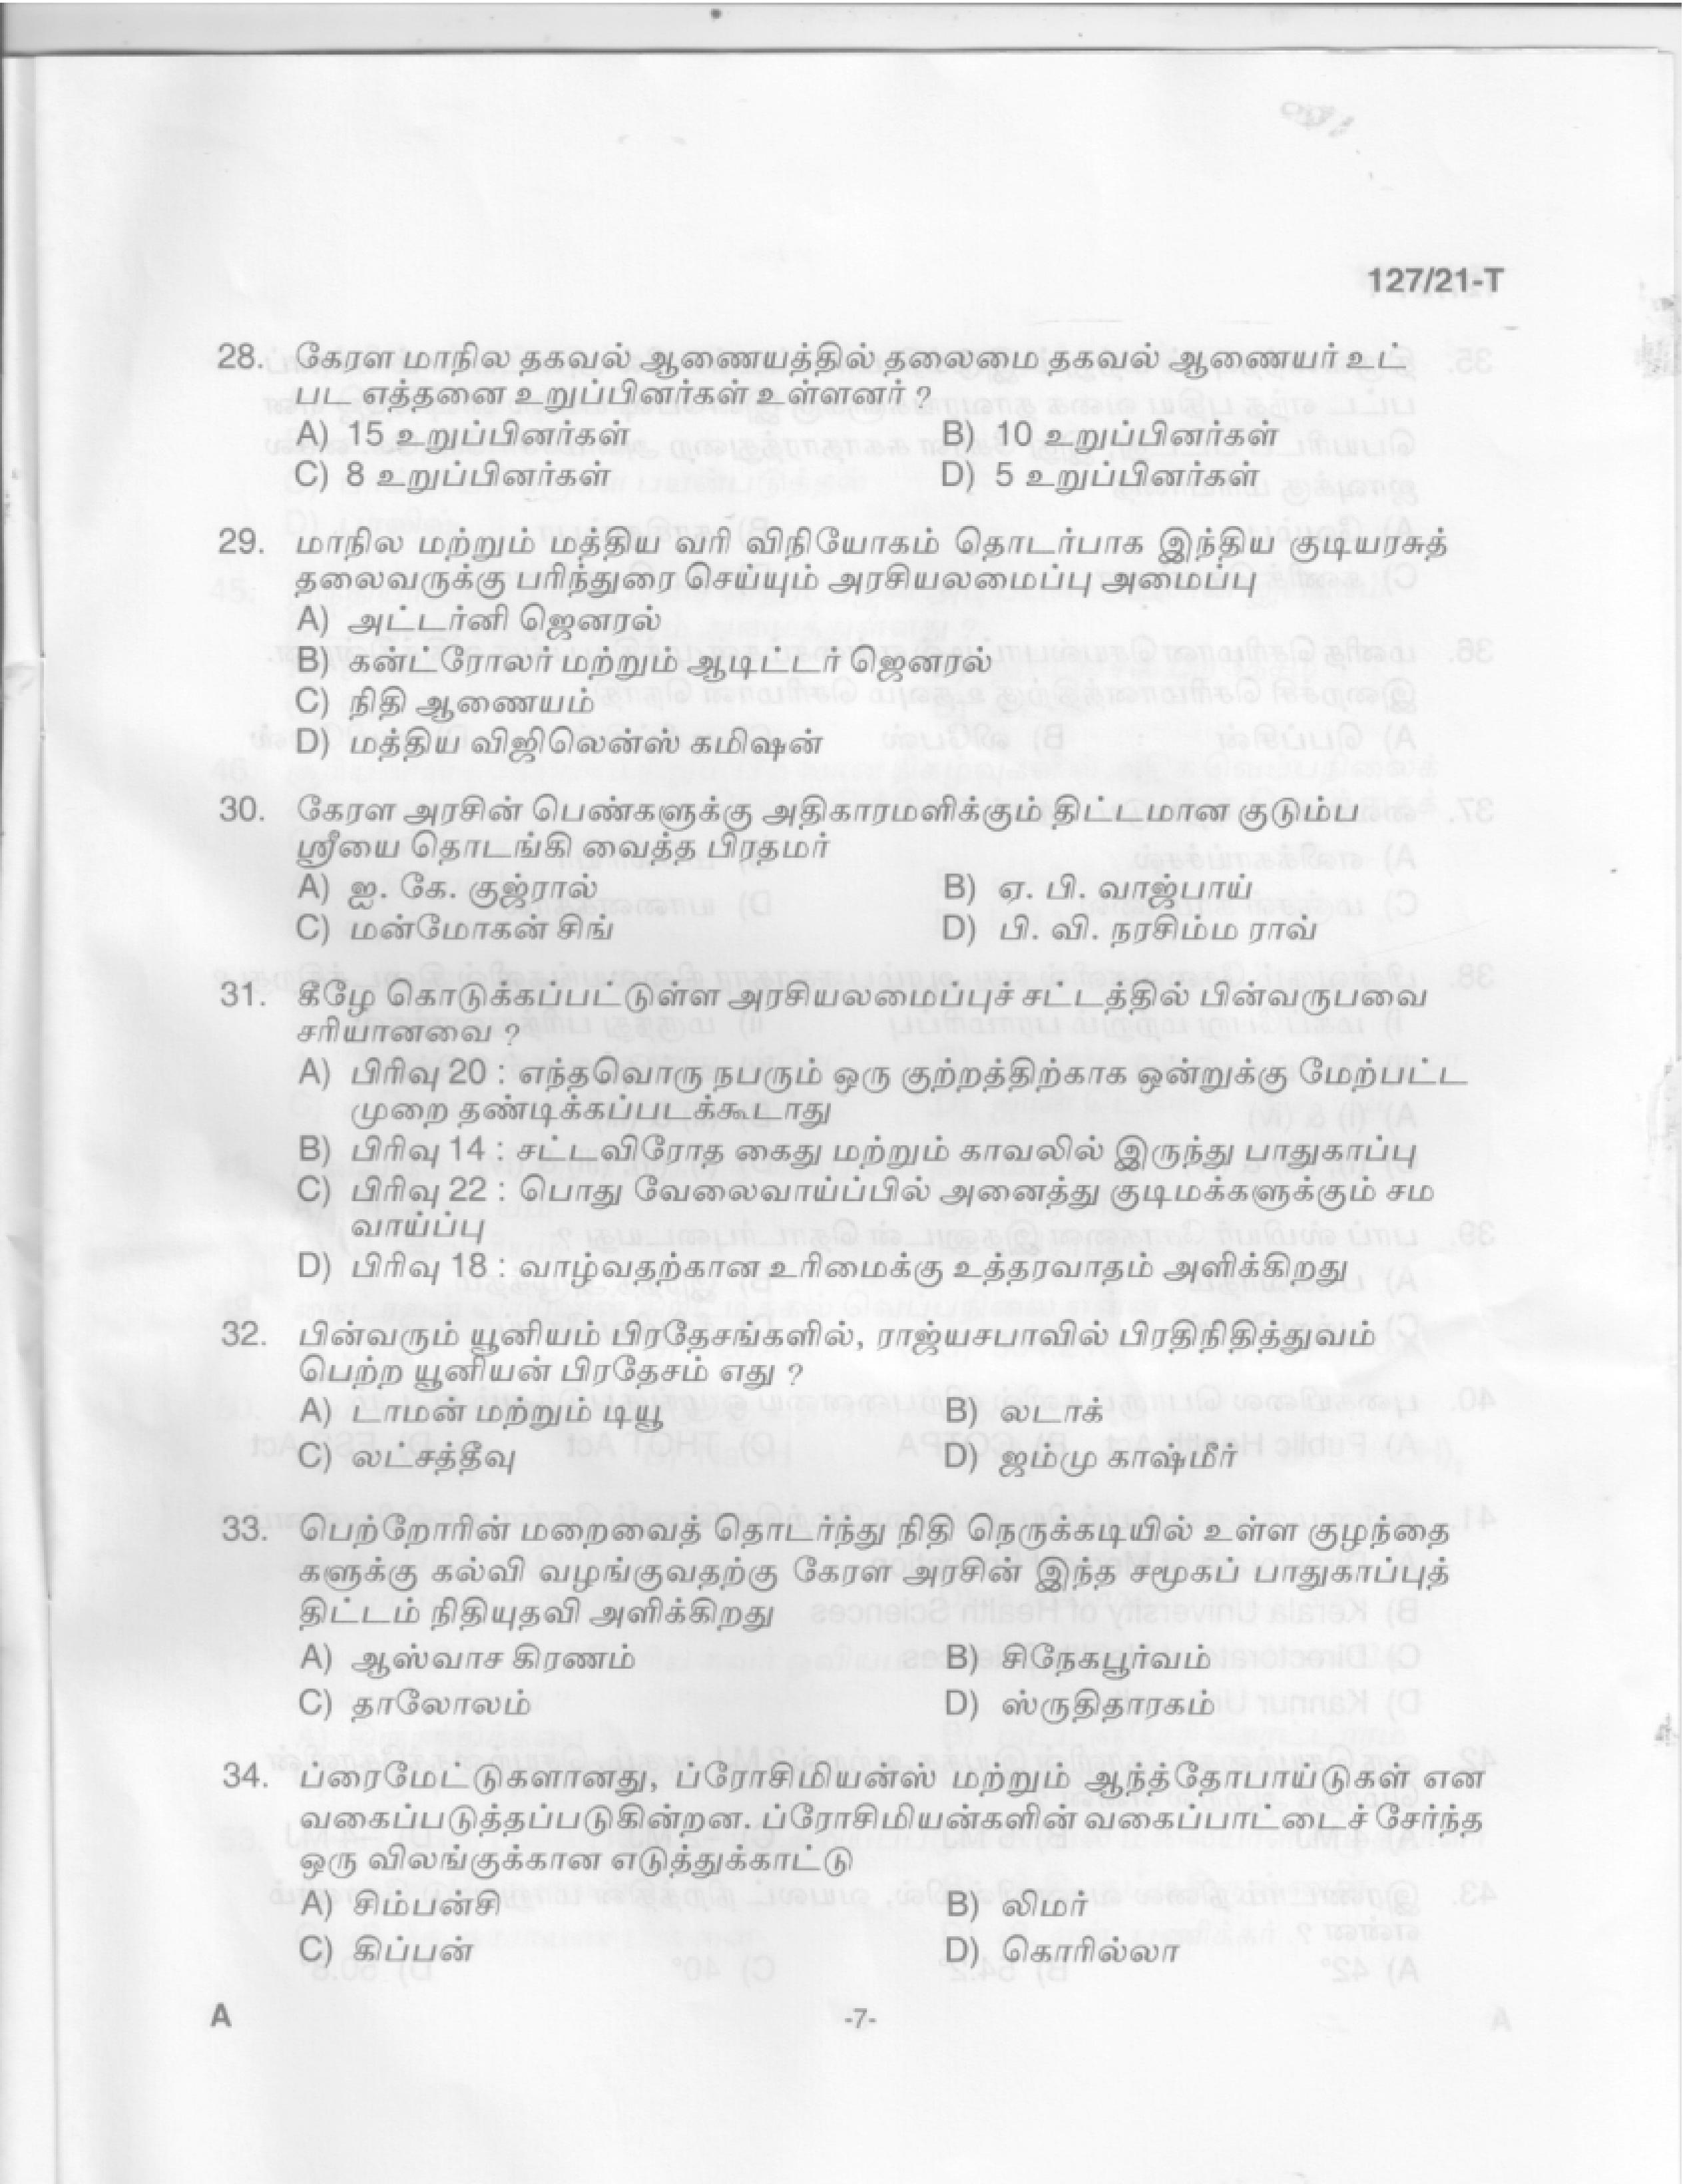 Office Attendant and Laboratory Attender Tamil Exam 2021 Code 1272021 5